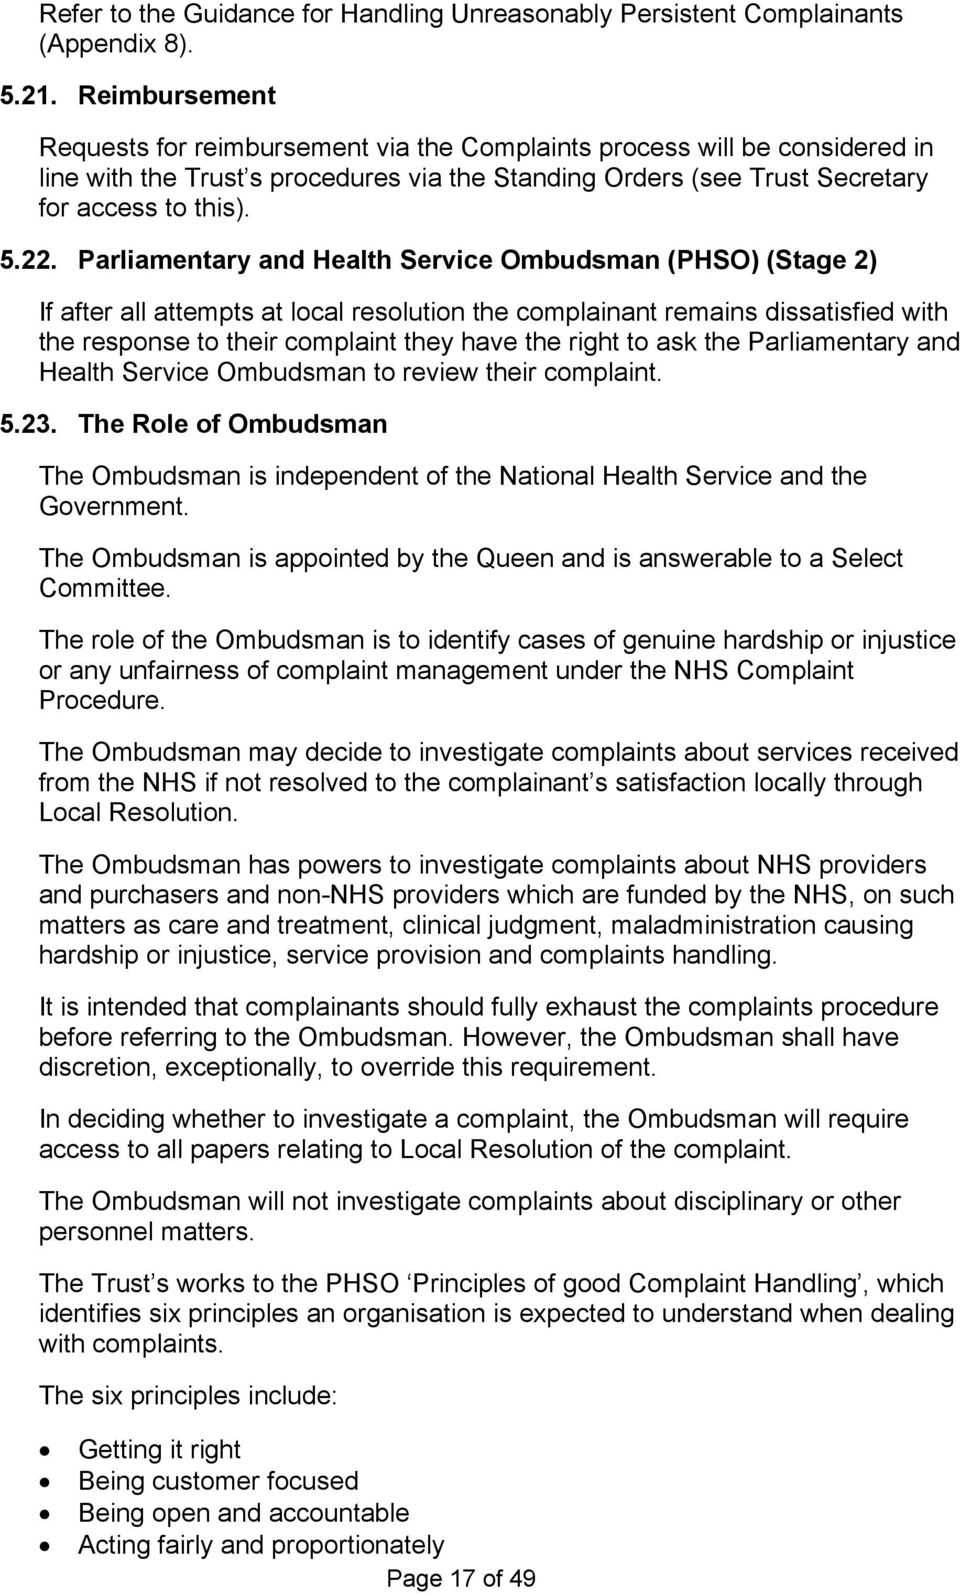 Parliamentary and Health Service Ombudsman (PHSO) (Stage 2) If after all attempts at local resolution the complainant remains dissatisfied with the response to their complaint they have the right to